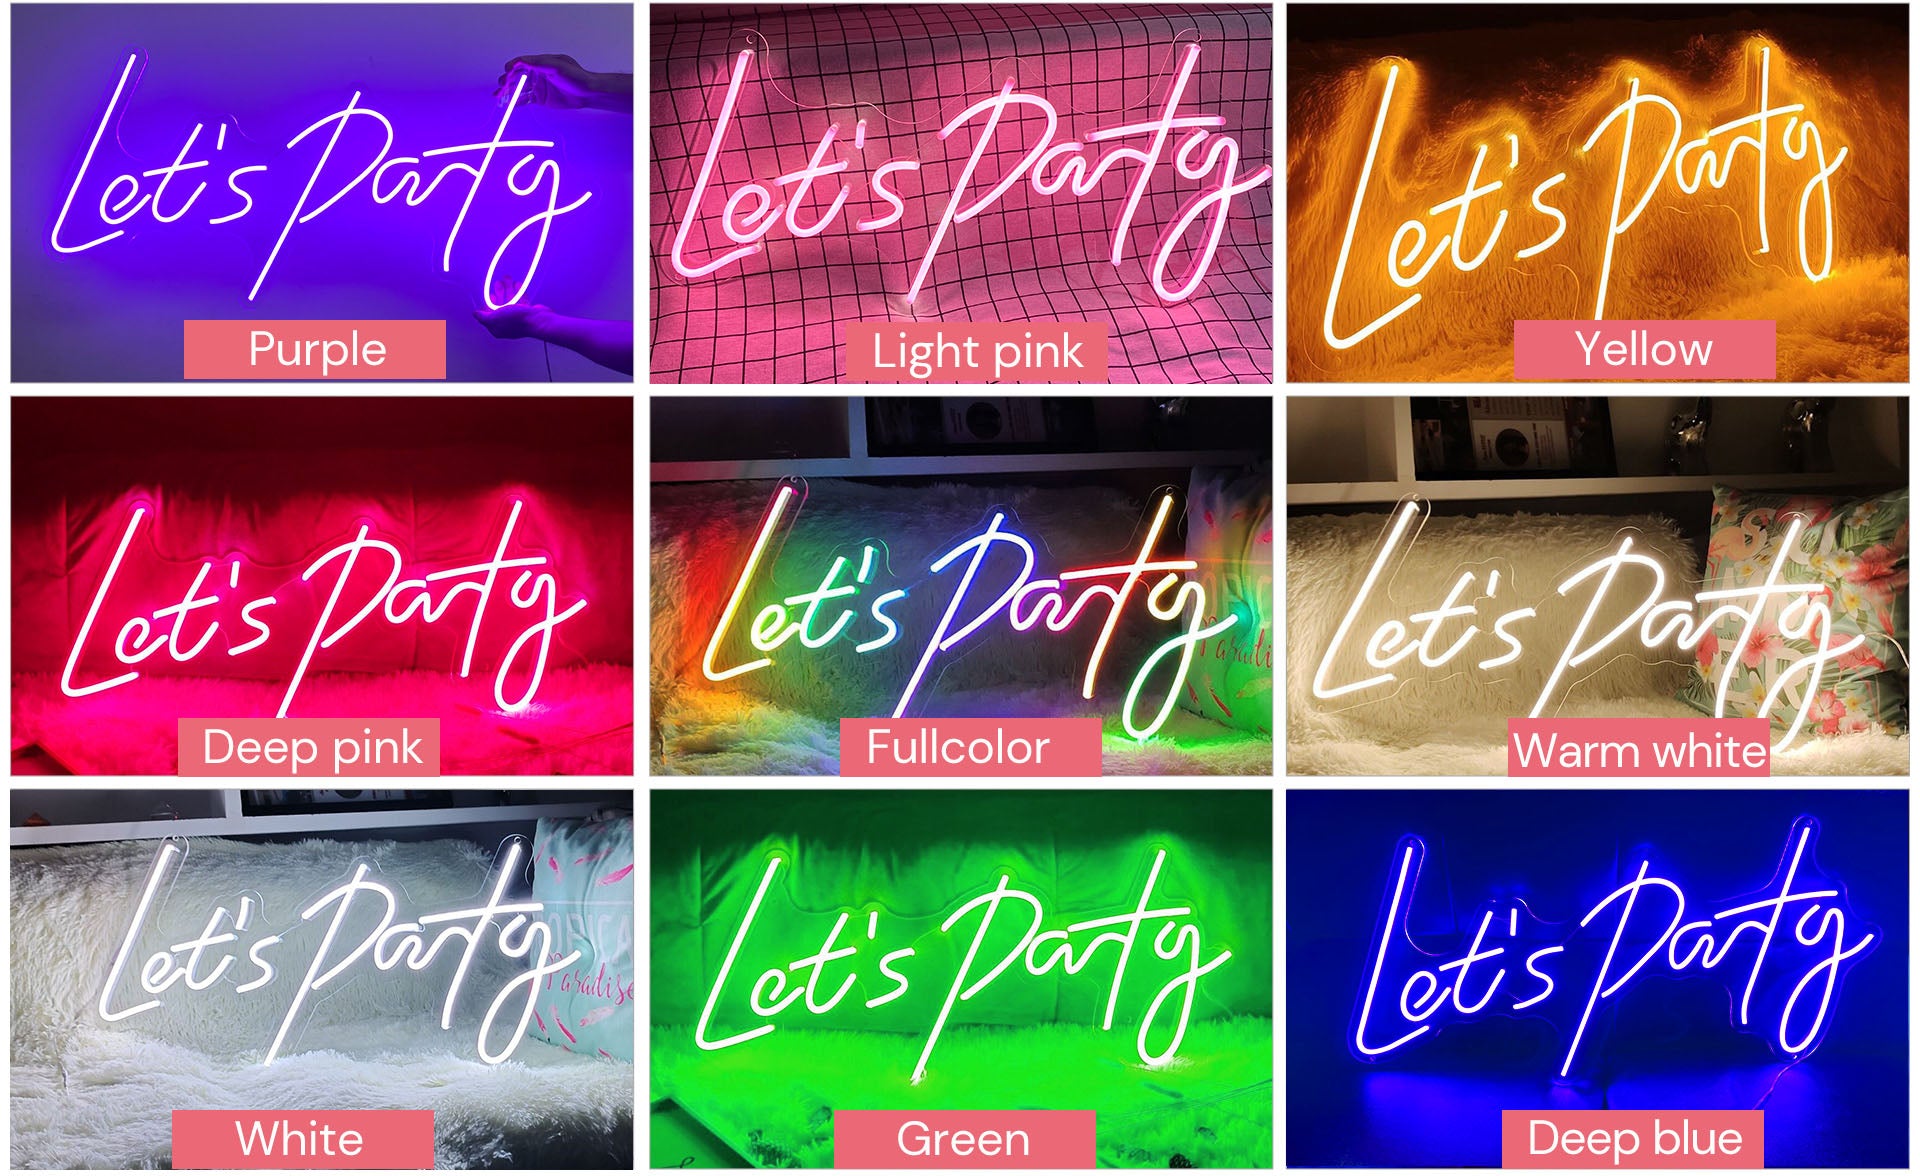 Let's party neon sign